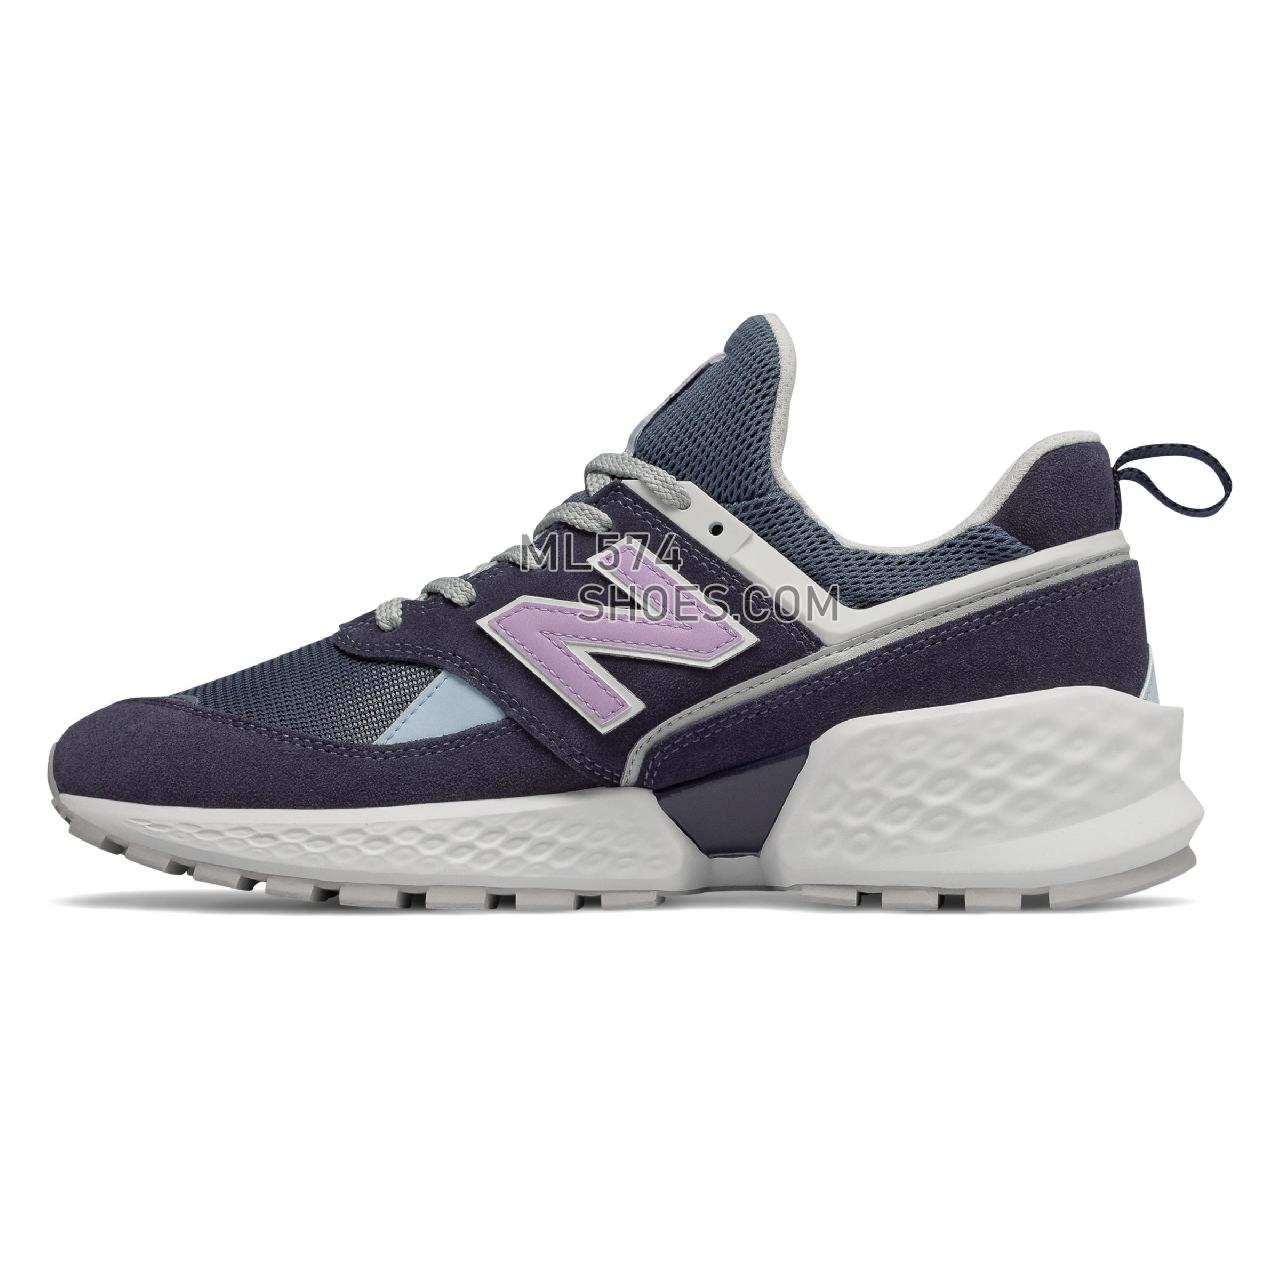 New Balance 574 Sport - Men's Sport Style Sneakers - Pigment with White - MS574GNA